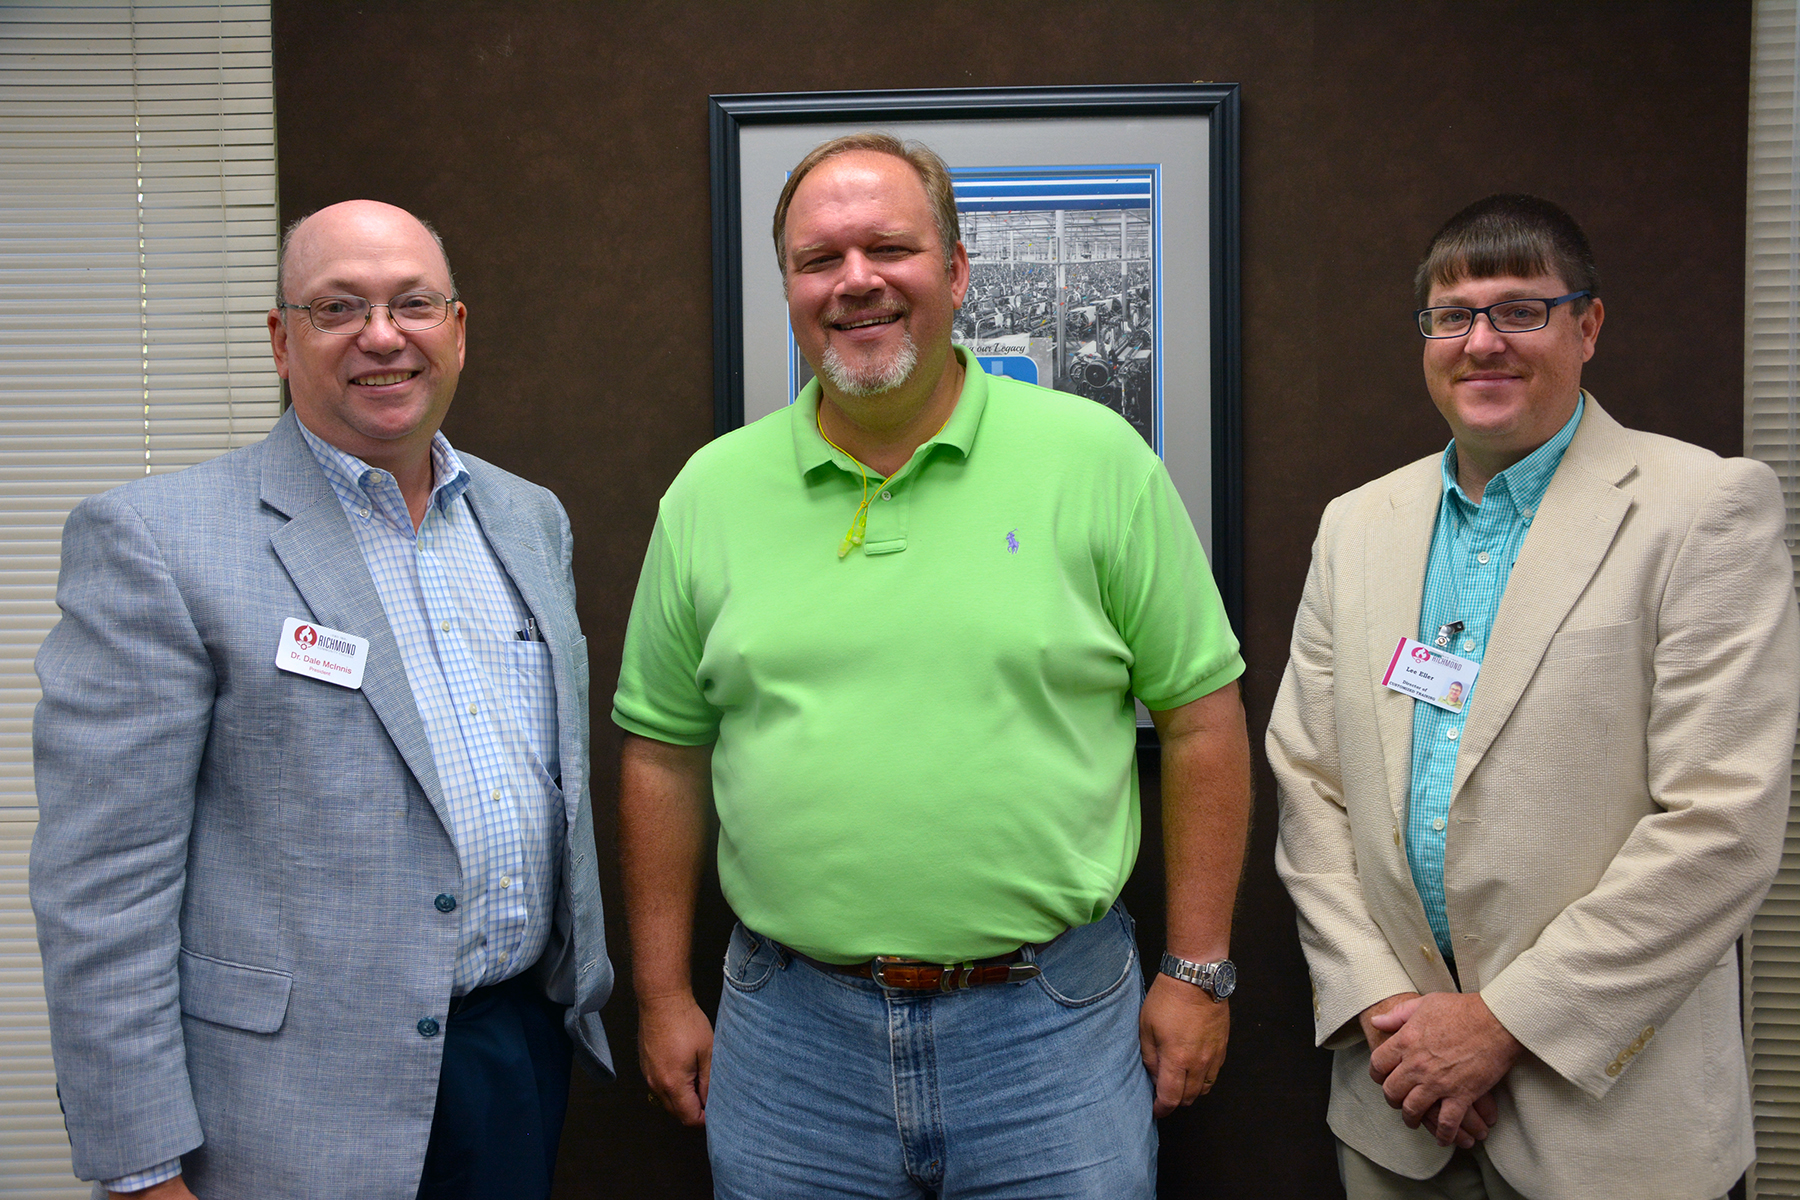 Richmond Community College will be providing customized training for ITG to help improve efficiency in its production lines. Pictured are Dr. Dale McInnis, RichmondCC president; Ed Cox, ITG plant manager; and Lee Eller, director of Customized Training. 